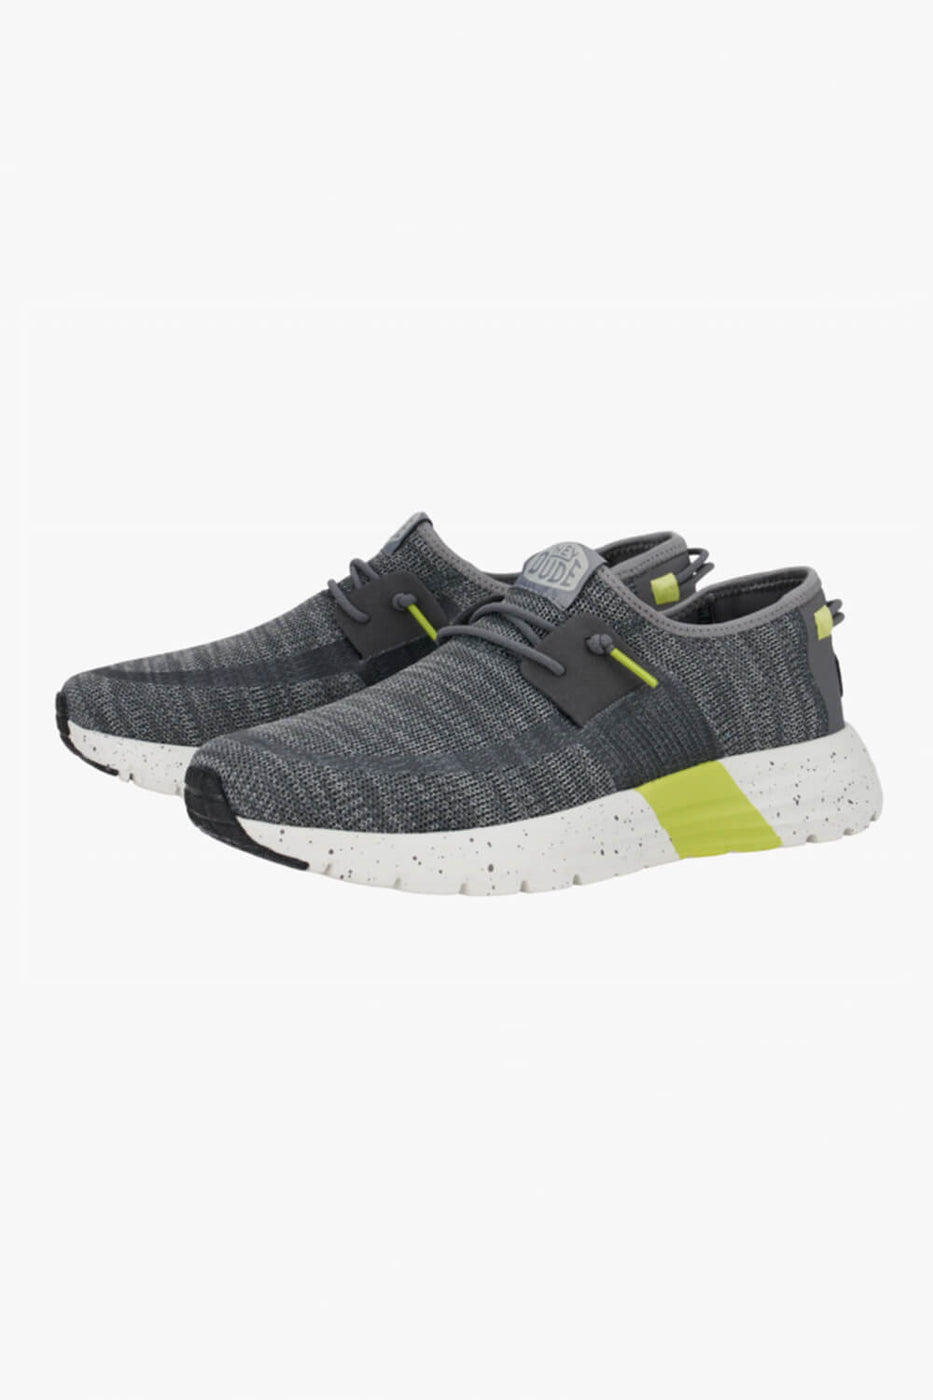 HEYDUDE Men's Sirocco Sport Mode Shoes in Heather Grey 